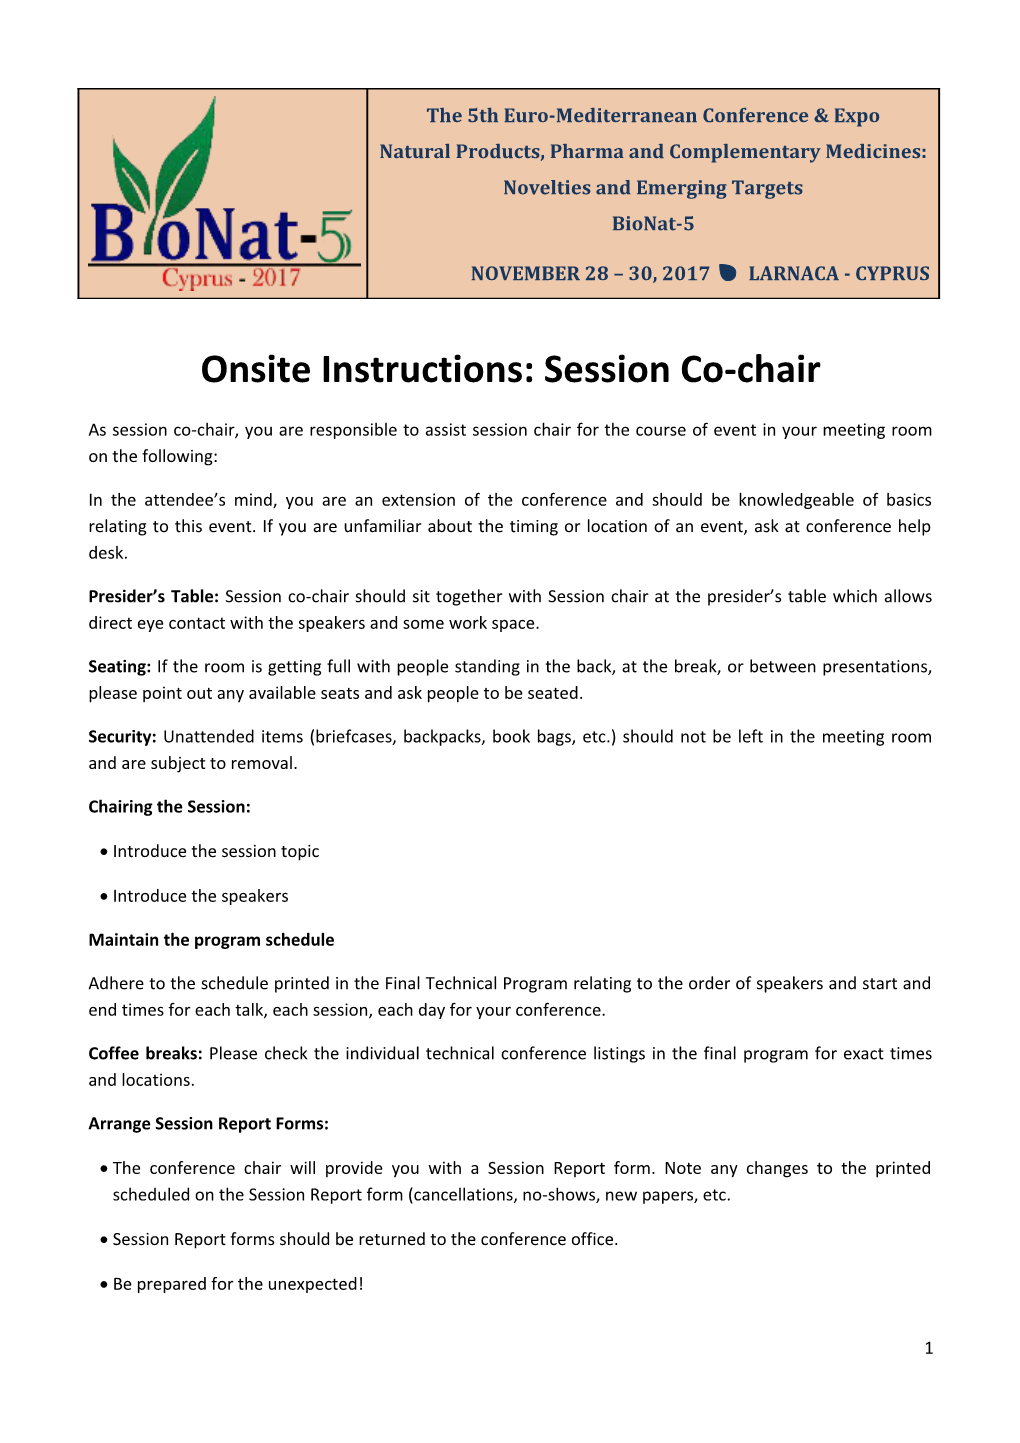 Onsite Instructions: Session Co-Chair